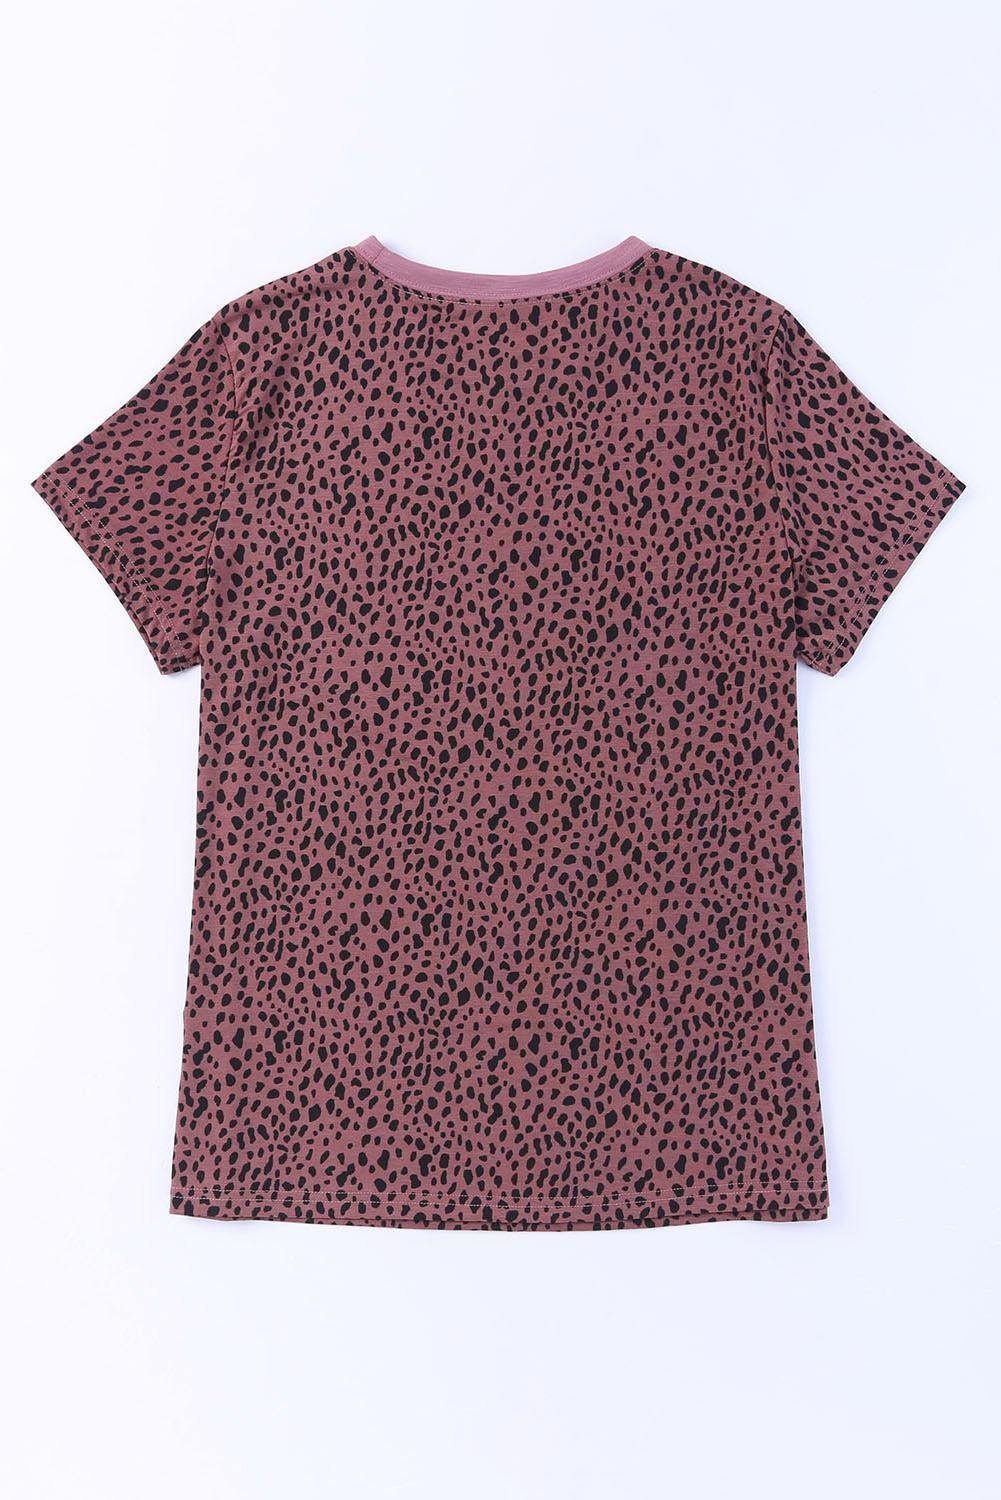 a t - shirt with a pink and black animal print